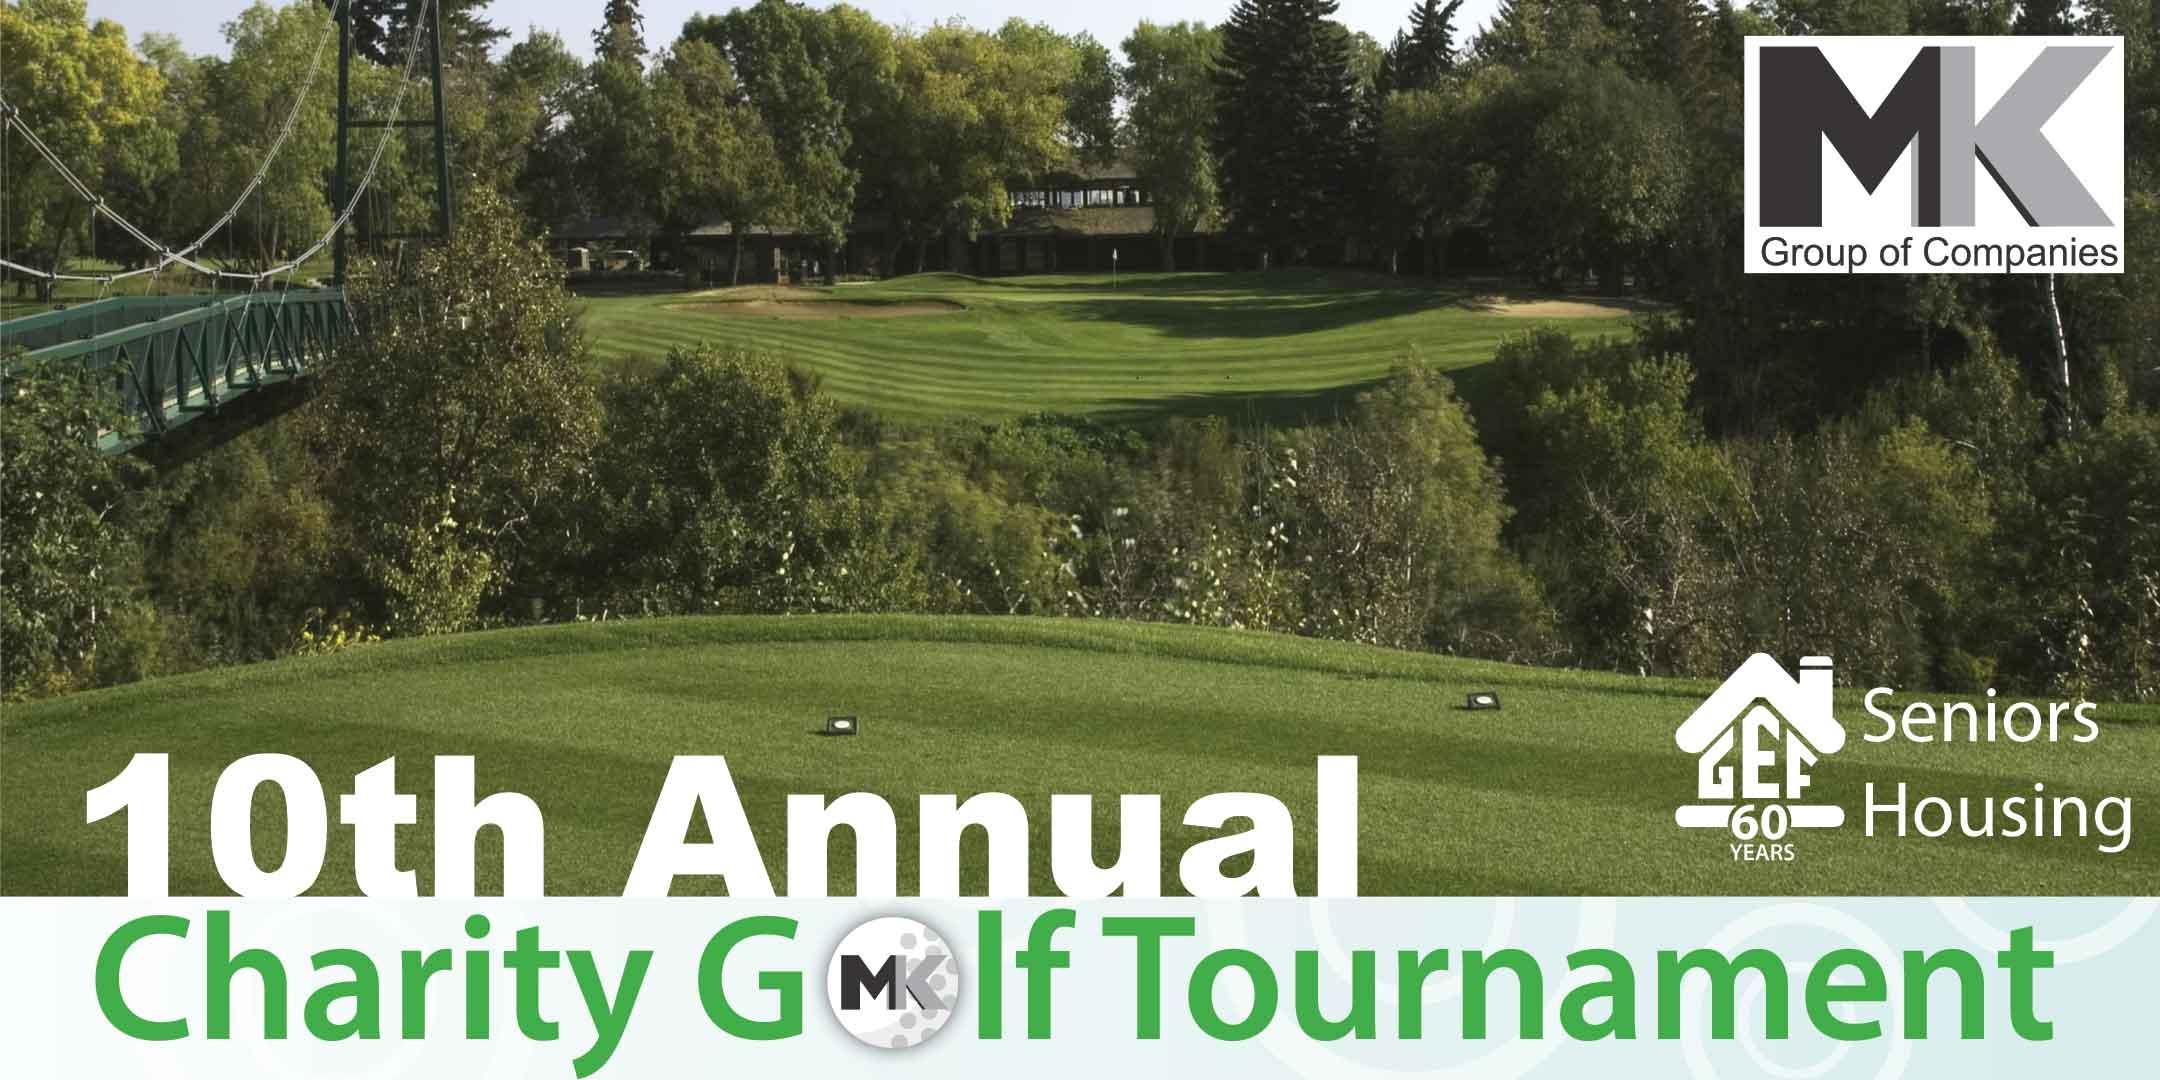 10th Annual MK Group of Companies Charity Golf Tournament